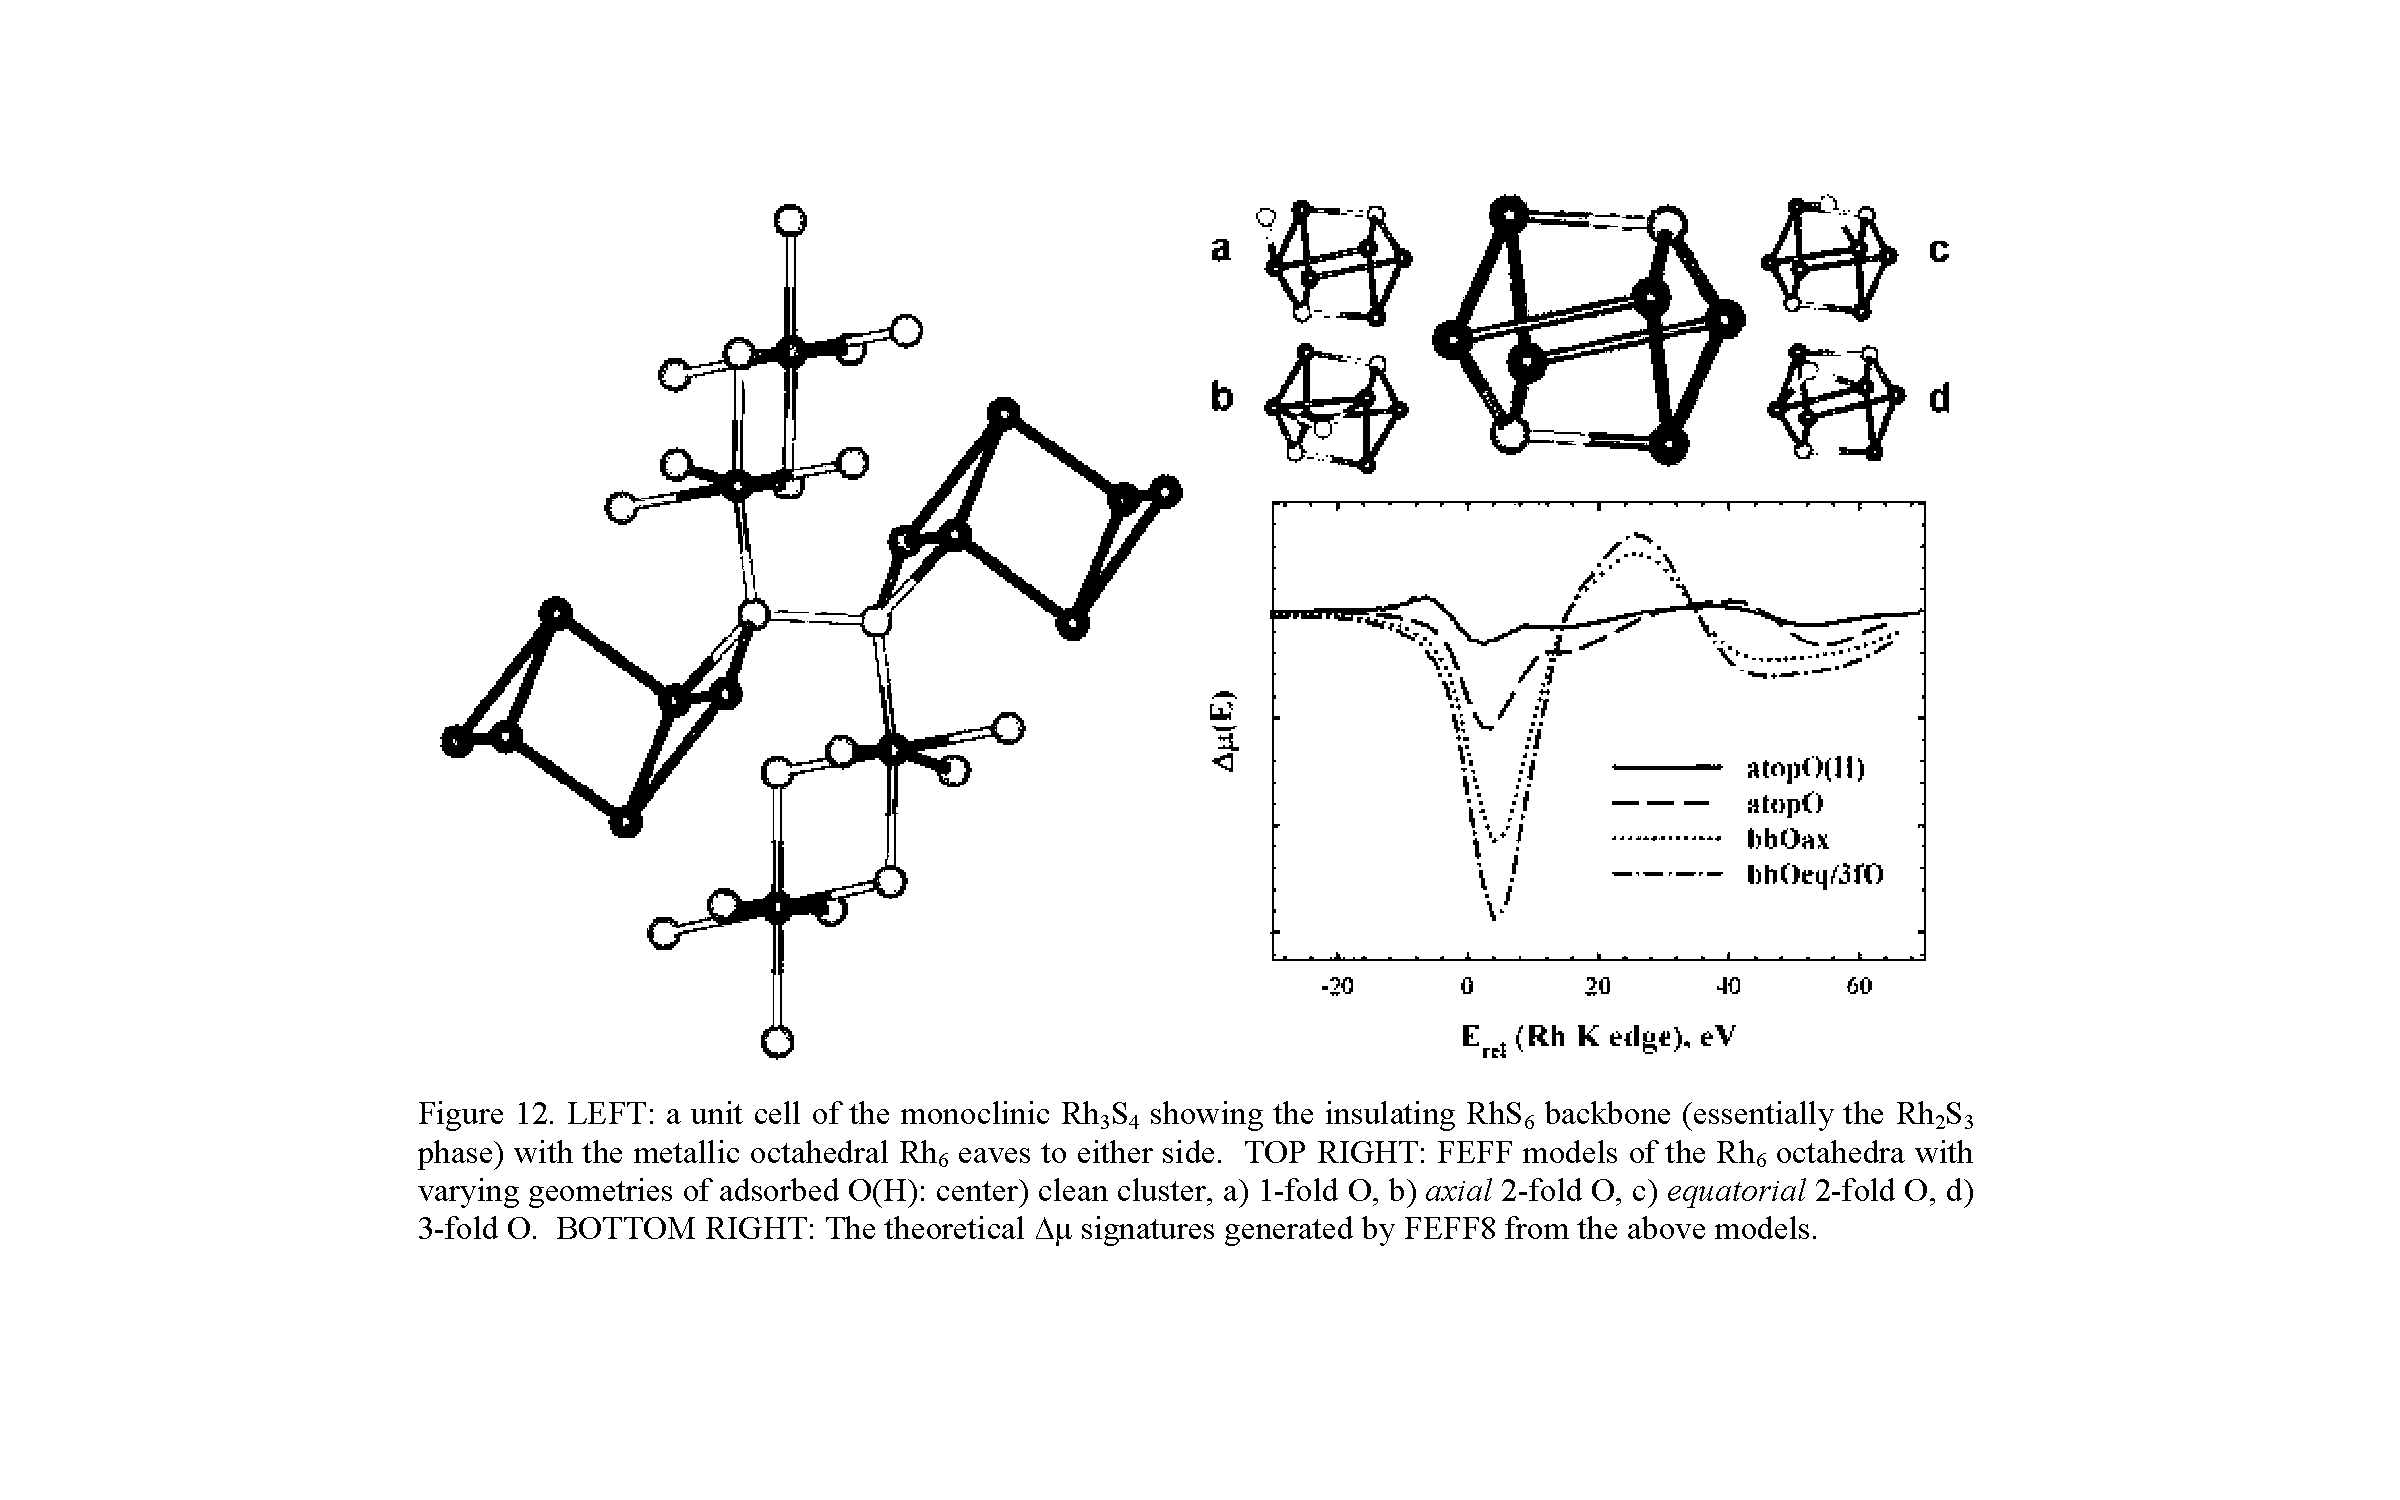 Figure 12. LEFT a unit cell of the monoclinic 1 384 showing the insulating RhSg backbone (essentially the 1 283 phase) with the metallic octahedral Rhe eaves to either side. TOP RIGHT FEFF models of the Rhe octahedra with varying geometries of adsorbed 0(H) center) clean cluster, a) 1-fold O, b) axial 2-fold O, c) equatorial 2-fold O, d) 3-fold O. BOTTOM RIGHT The theoretical Ap signatures generated by EEEE8 from the above models.